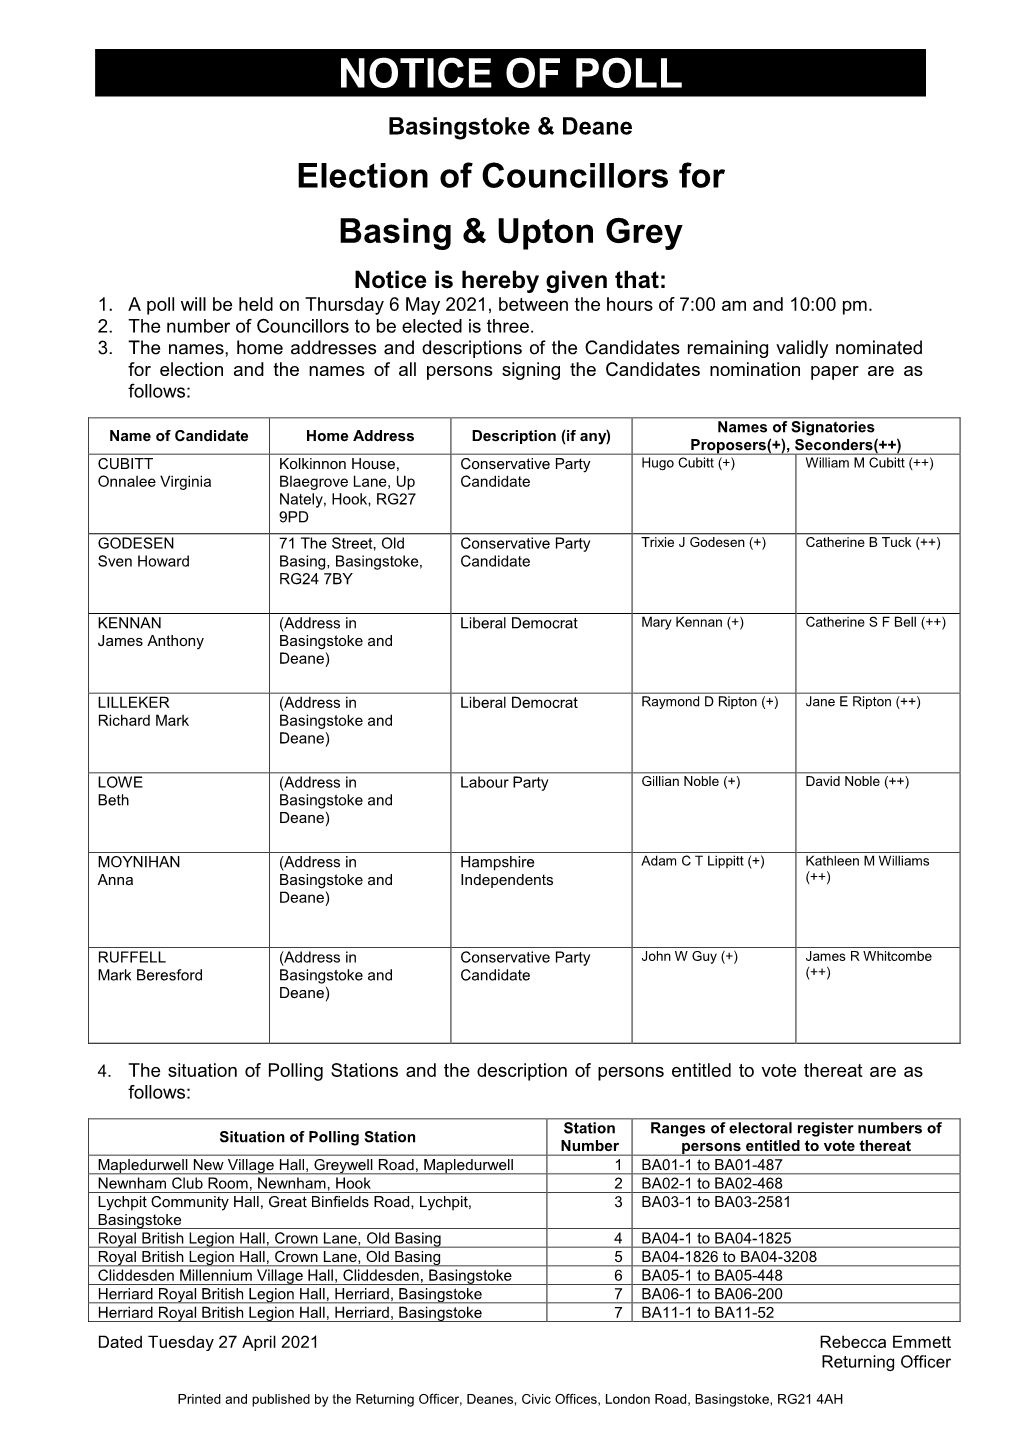 Basingstoke and Deane Borough Council Notices of Poll and Situation of Polling Stations